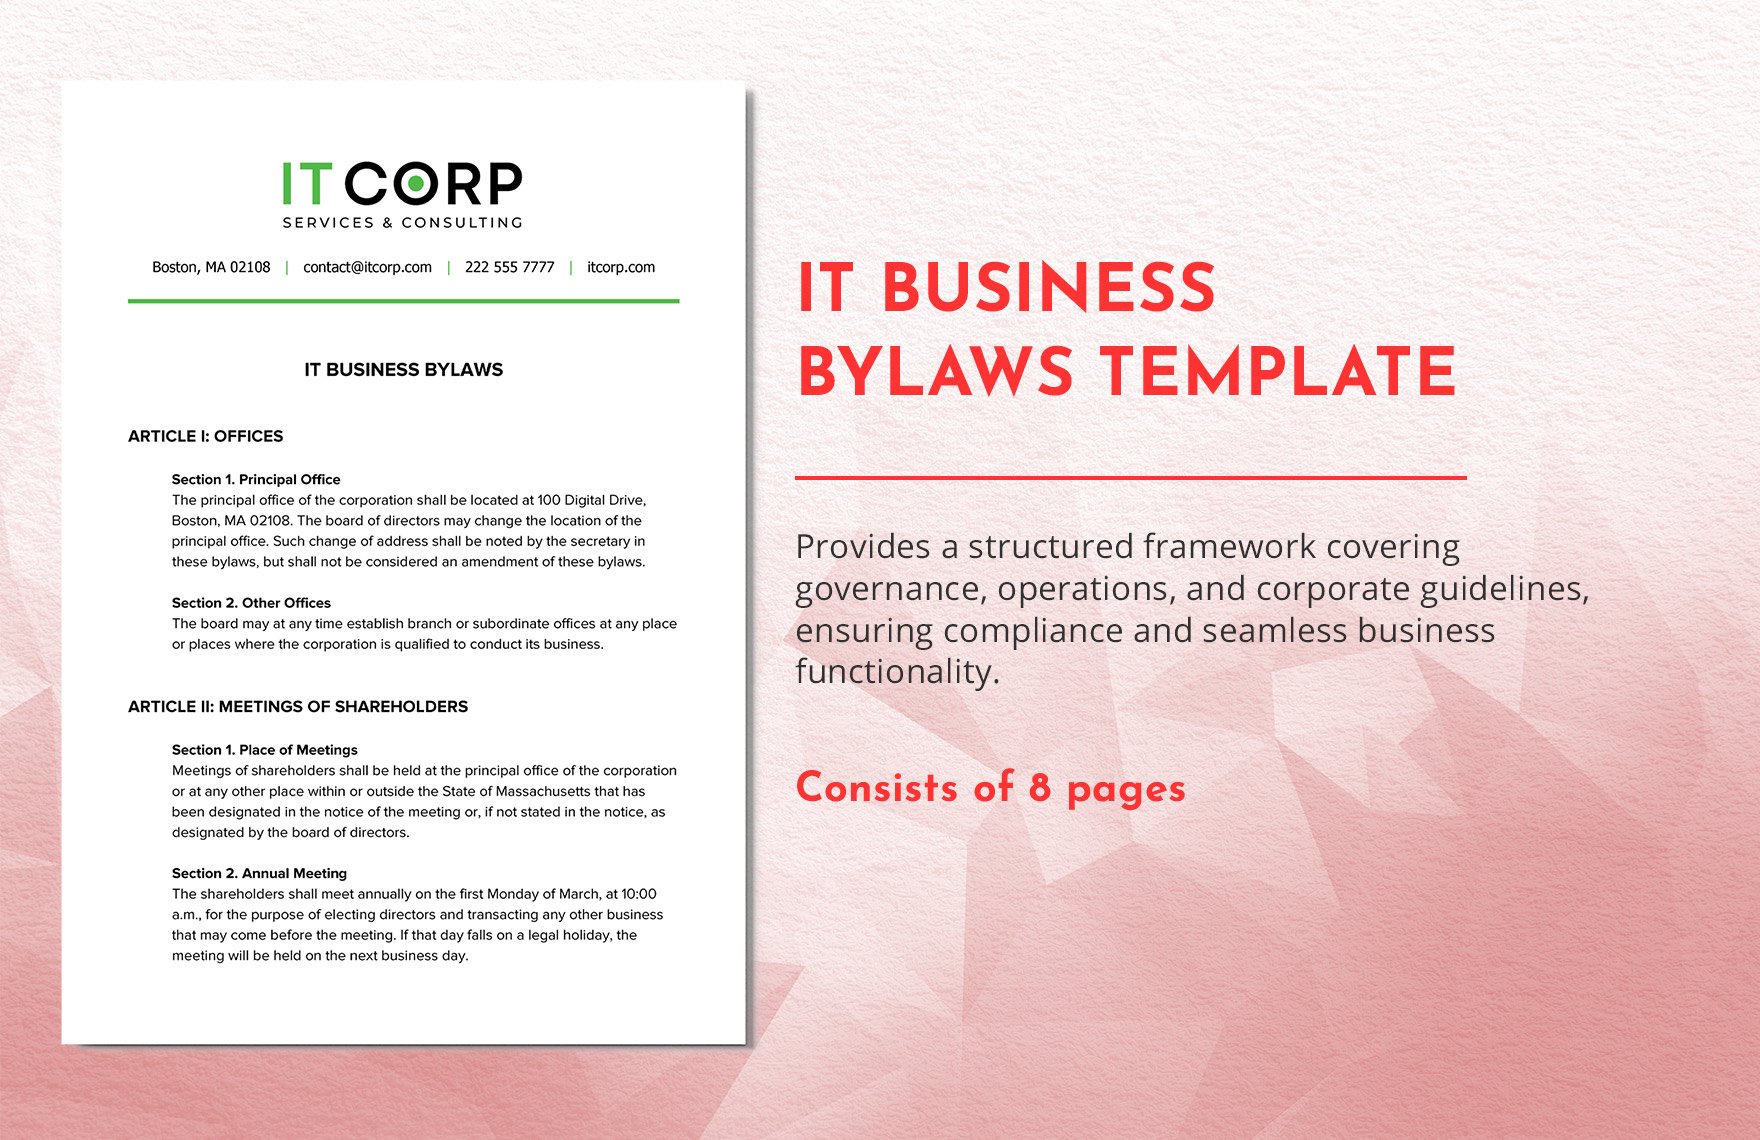 IT Business Bylaws Template